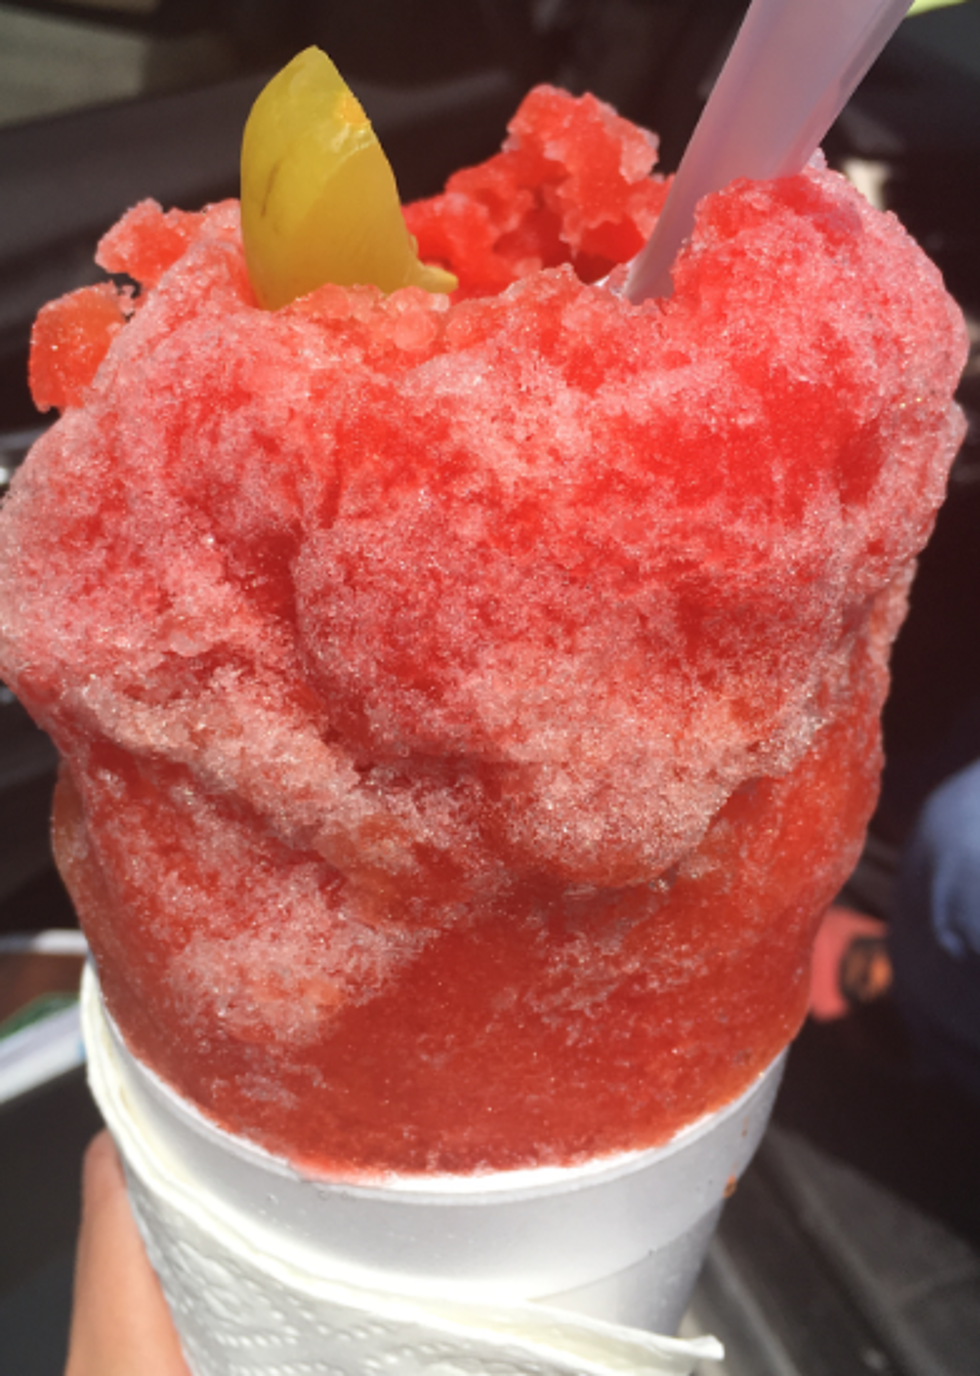 Best Snow Cones And Favorite Flavor In The 4-3-2?